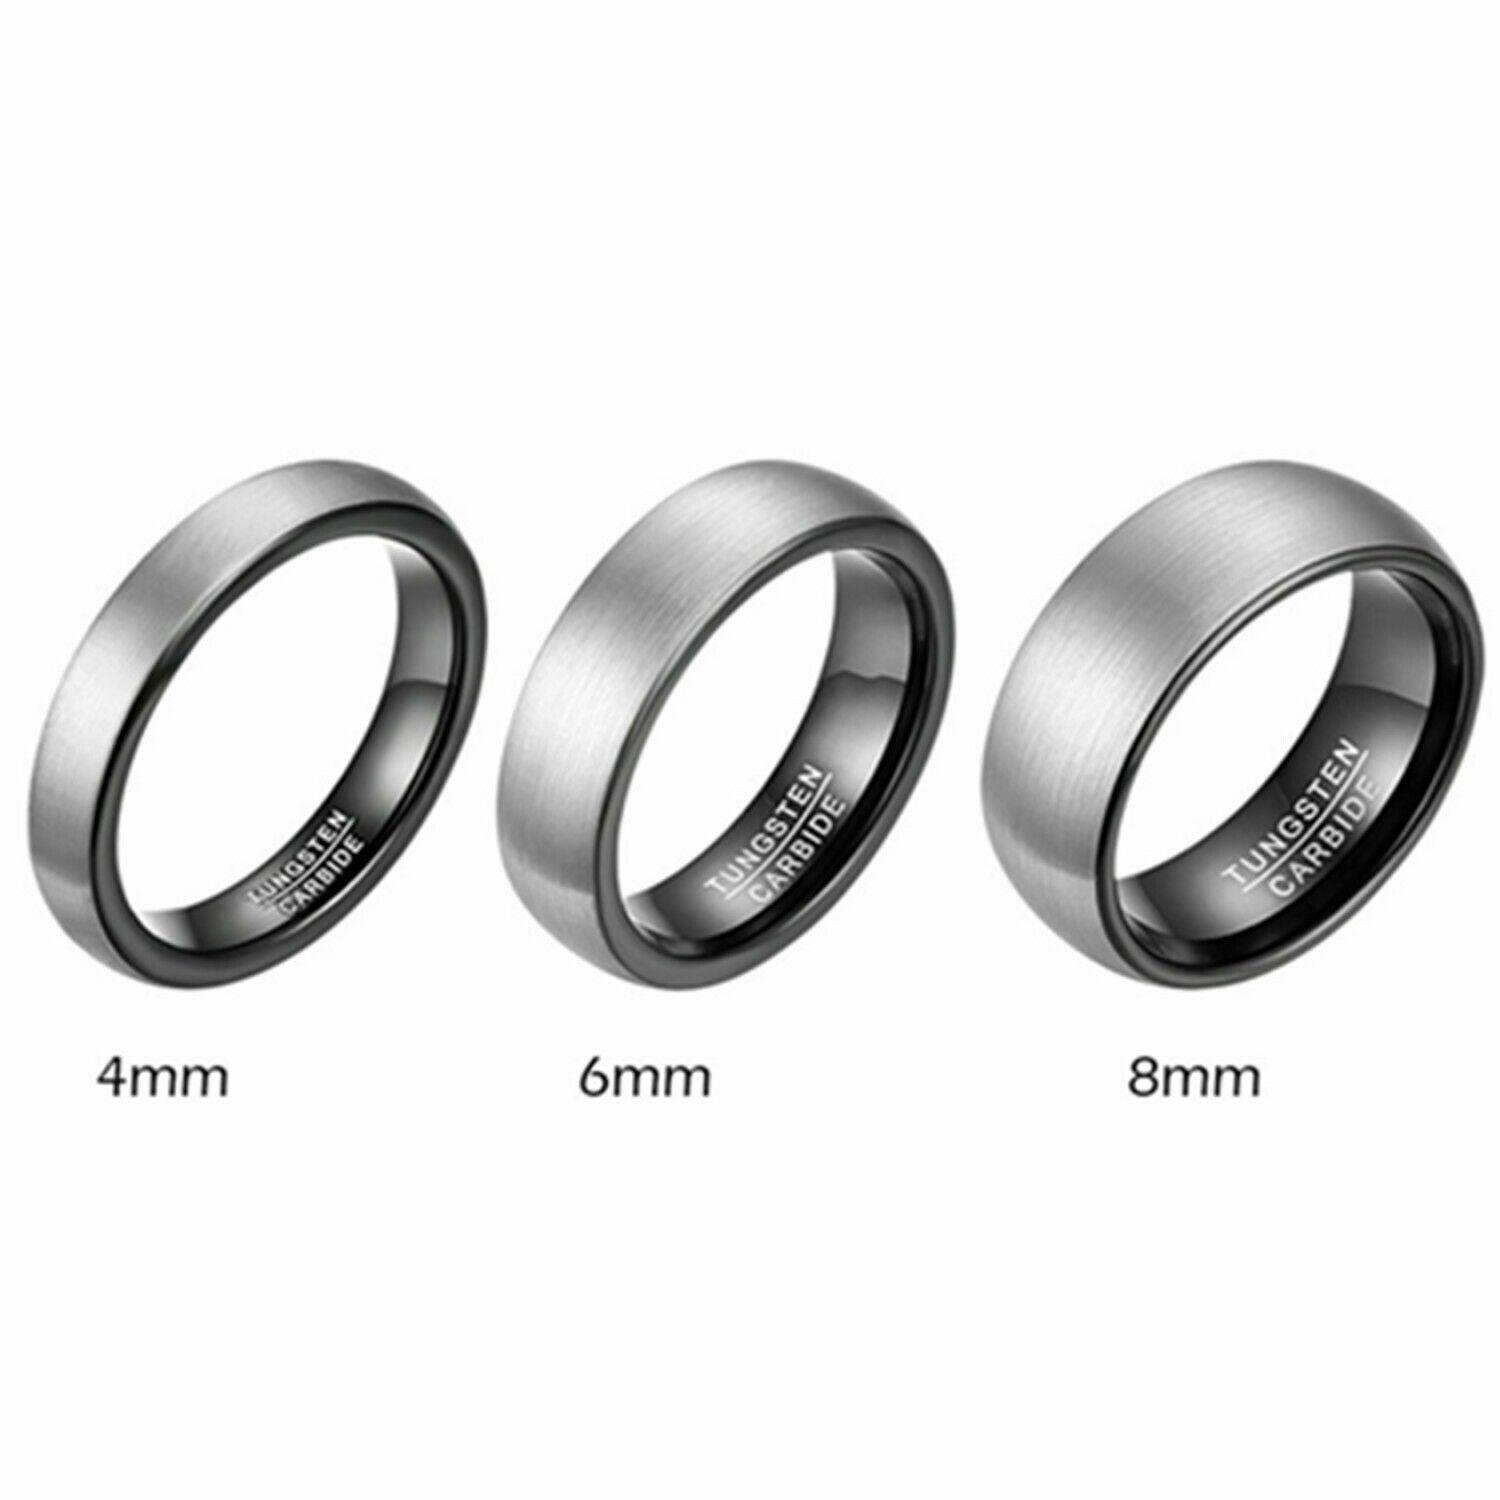 Metal Ring Sizers 6mm | Standard or Comfort Fit